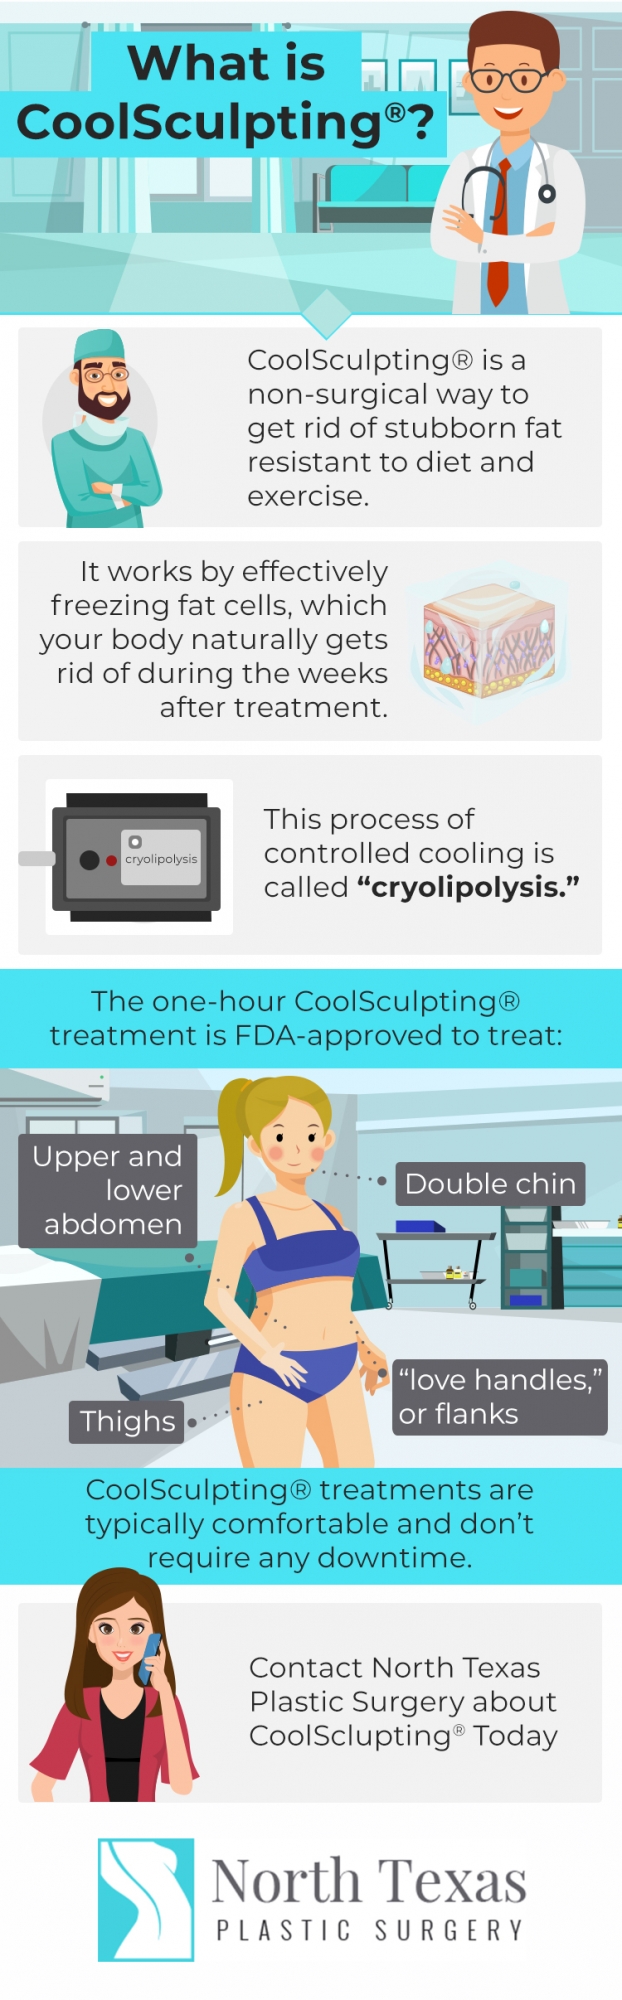 Dallas medical spa offers CoolSculpting infographic 